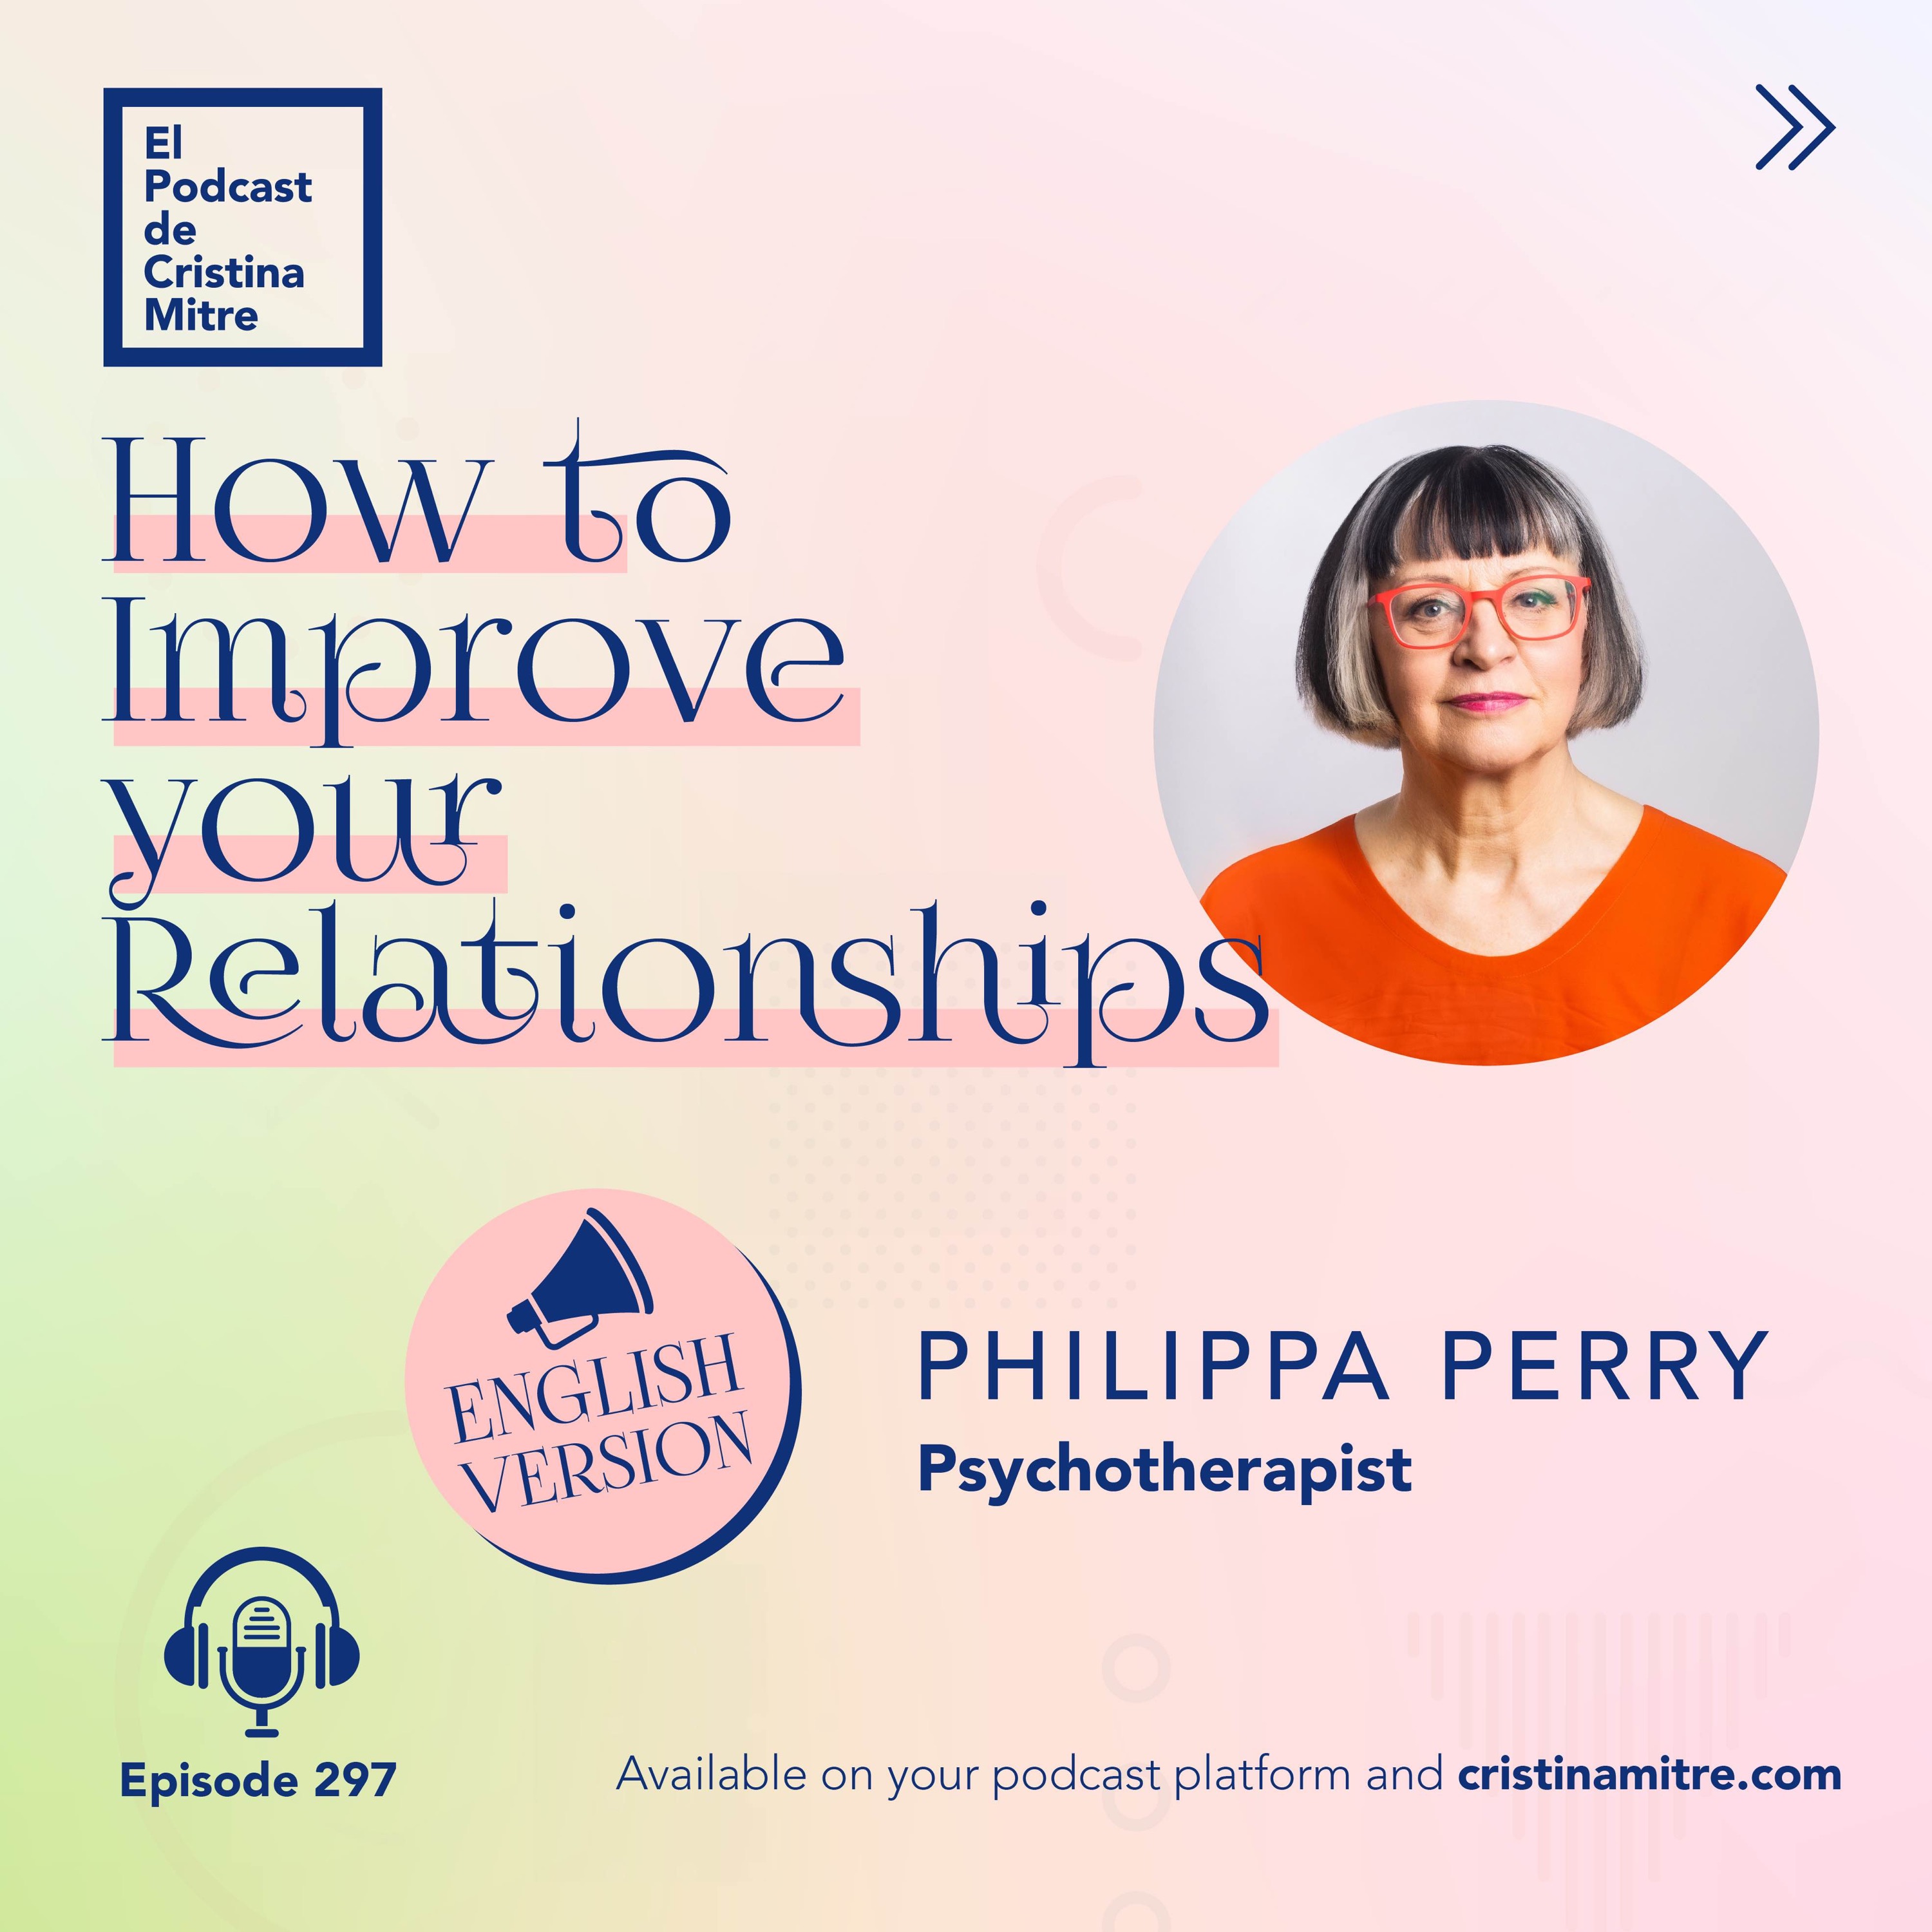 How to Improve your Relationships, with Philippa Perry. Episode 297 (english version)